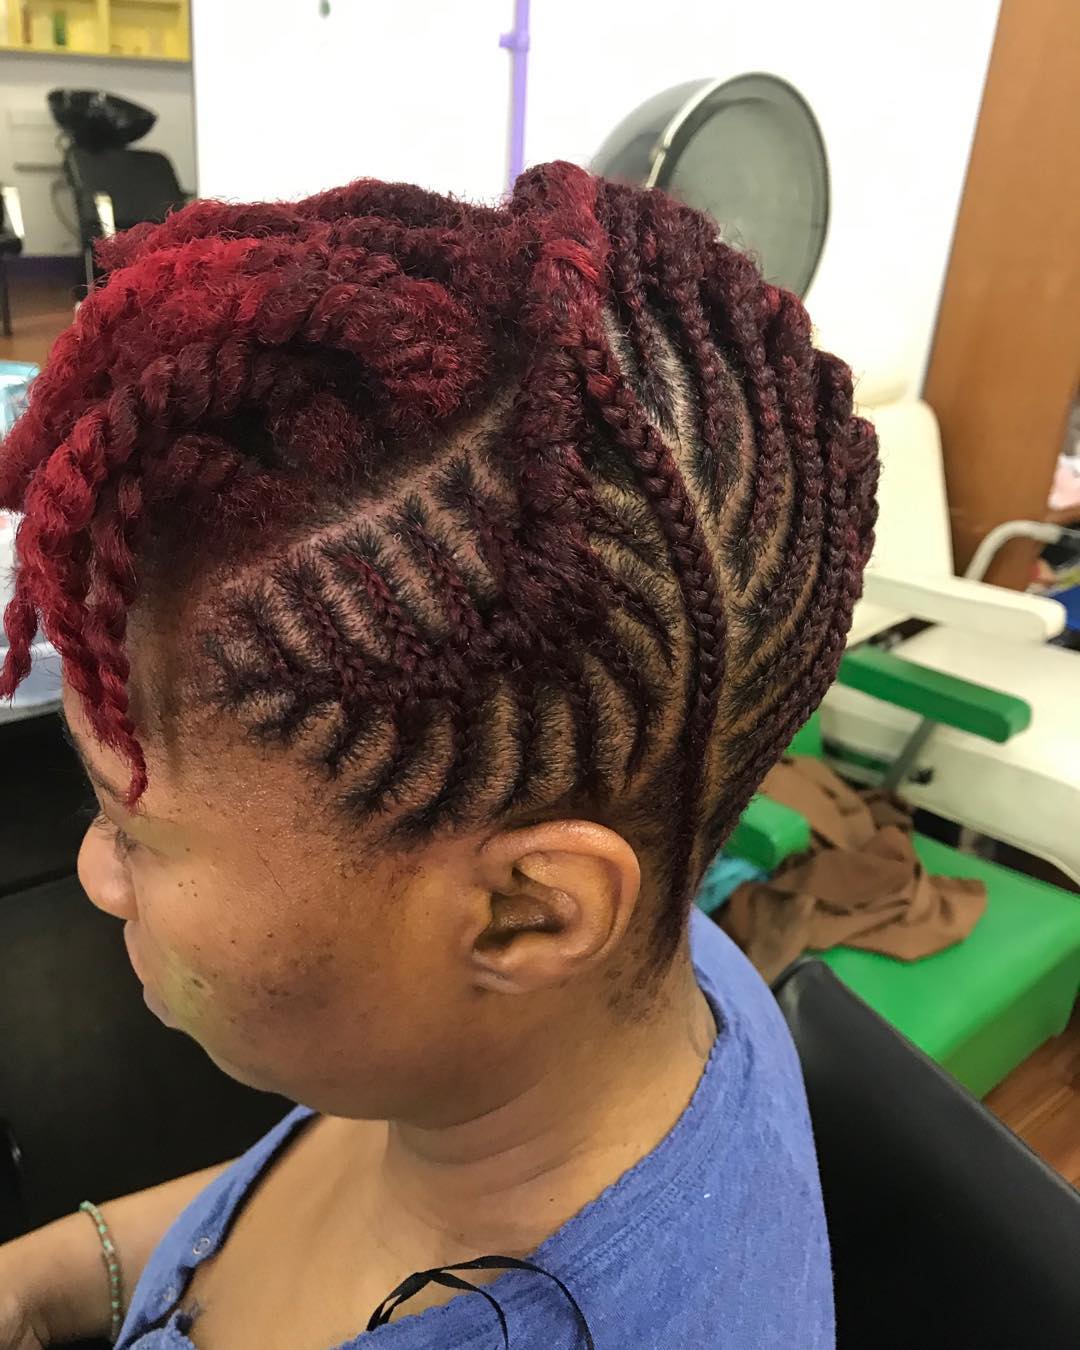 24. Burgundy Freestyle Weaves With Twist Fringes